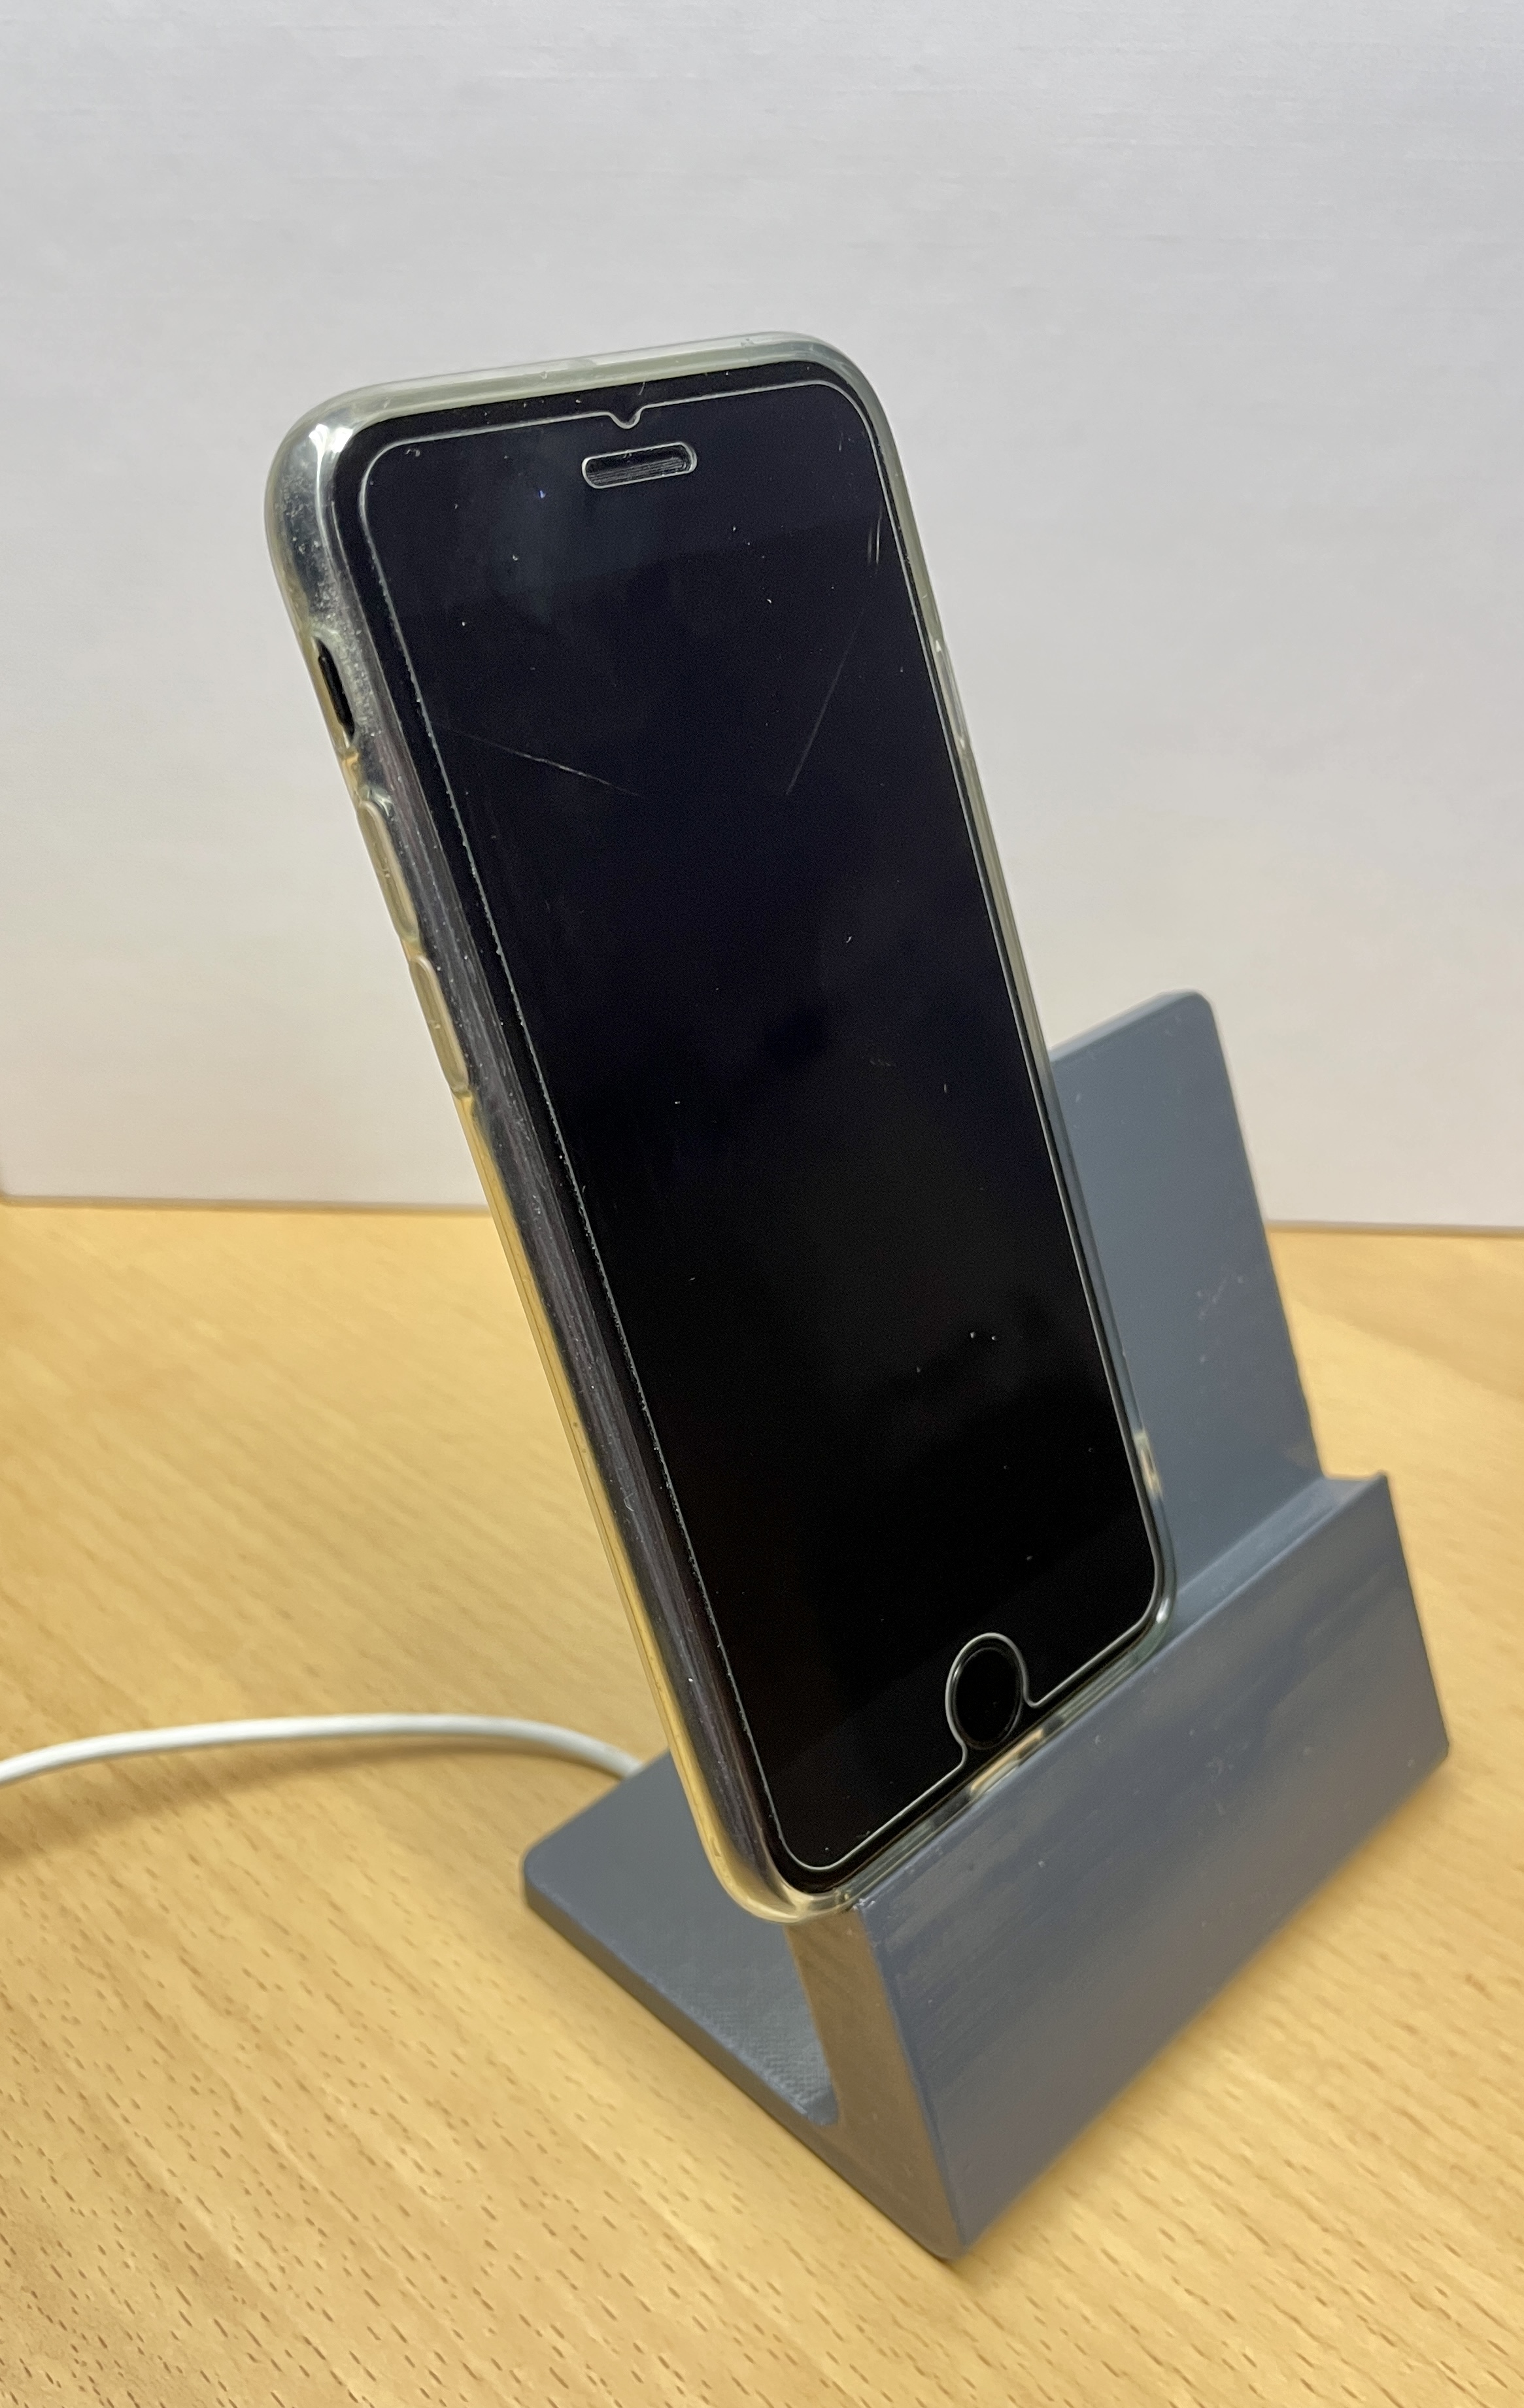 iPhone charging stand